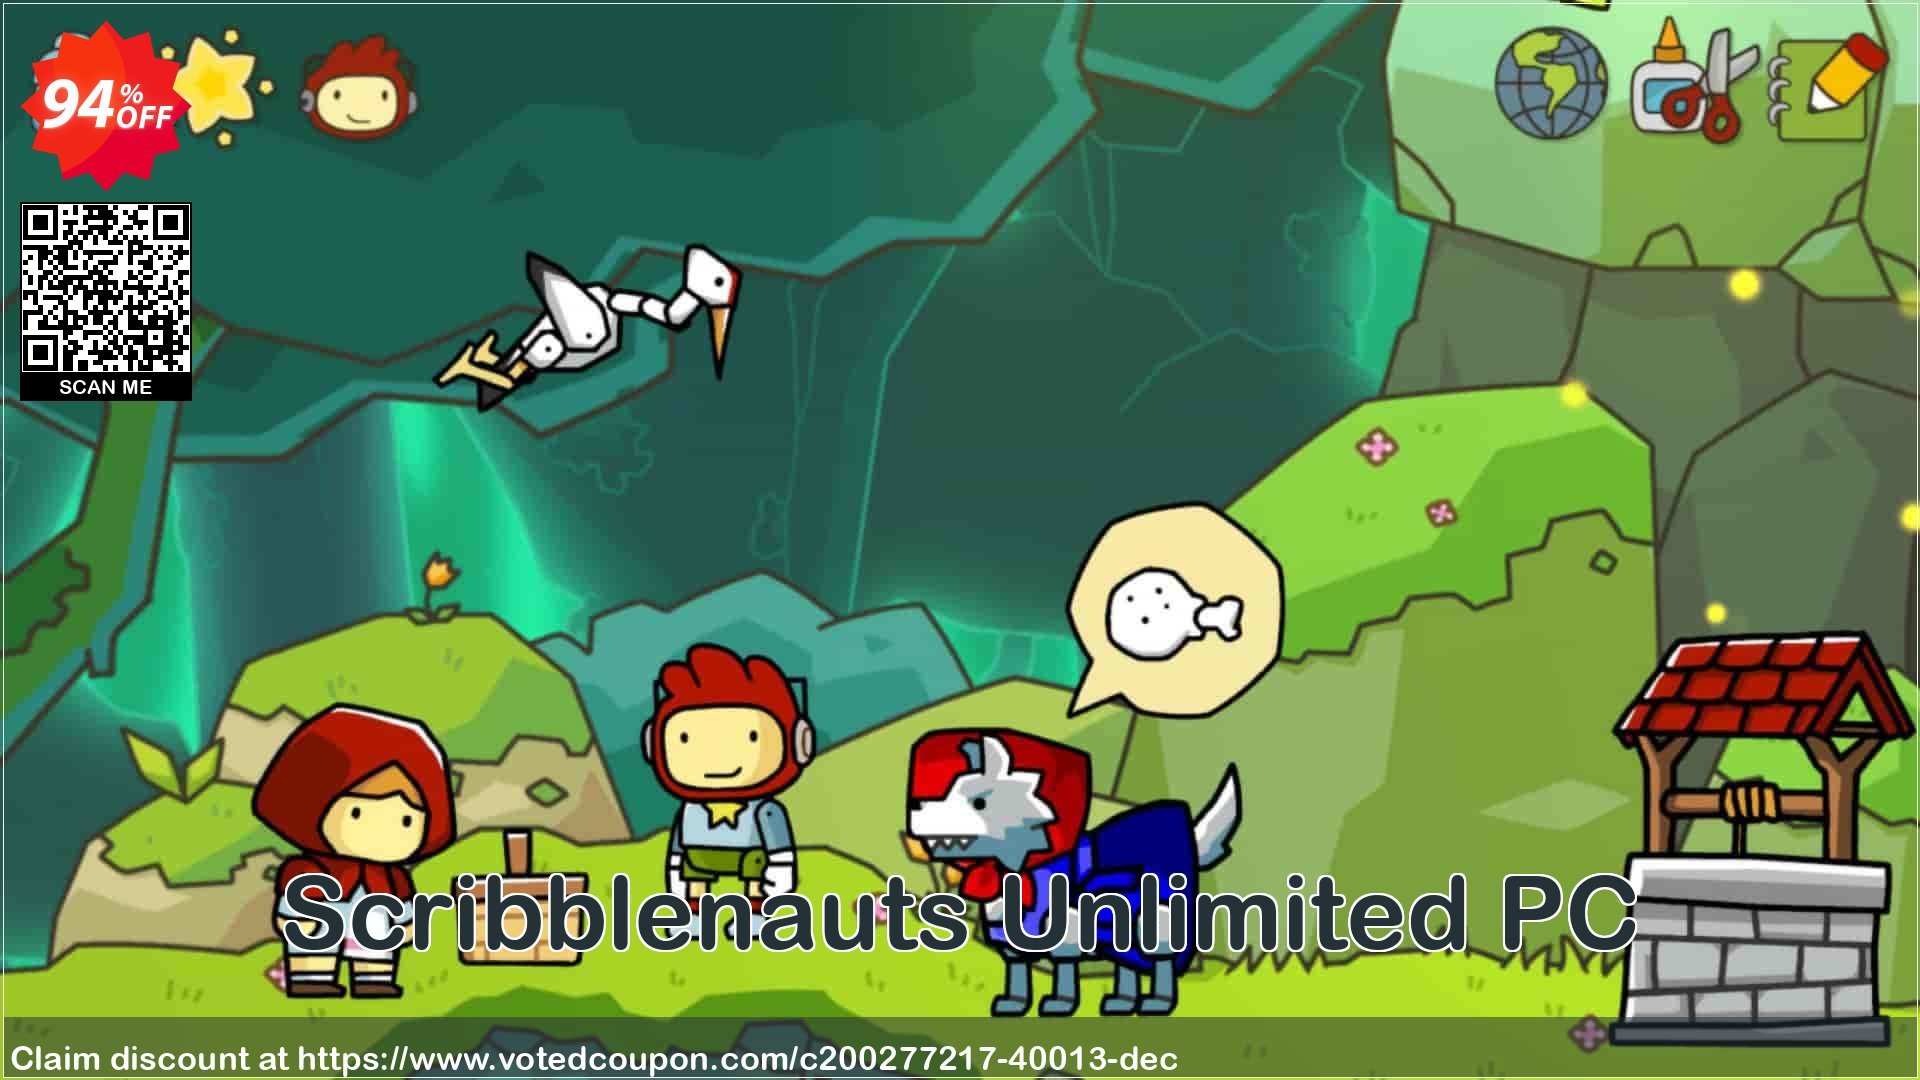 Scribblenauts Unlimited PC Coupon Code Apr 2024, 94% OFF - VotedCoupon